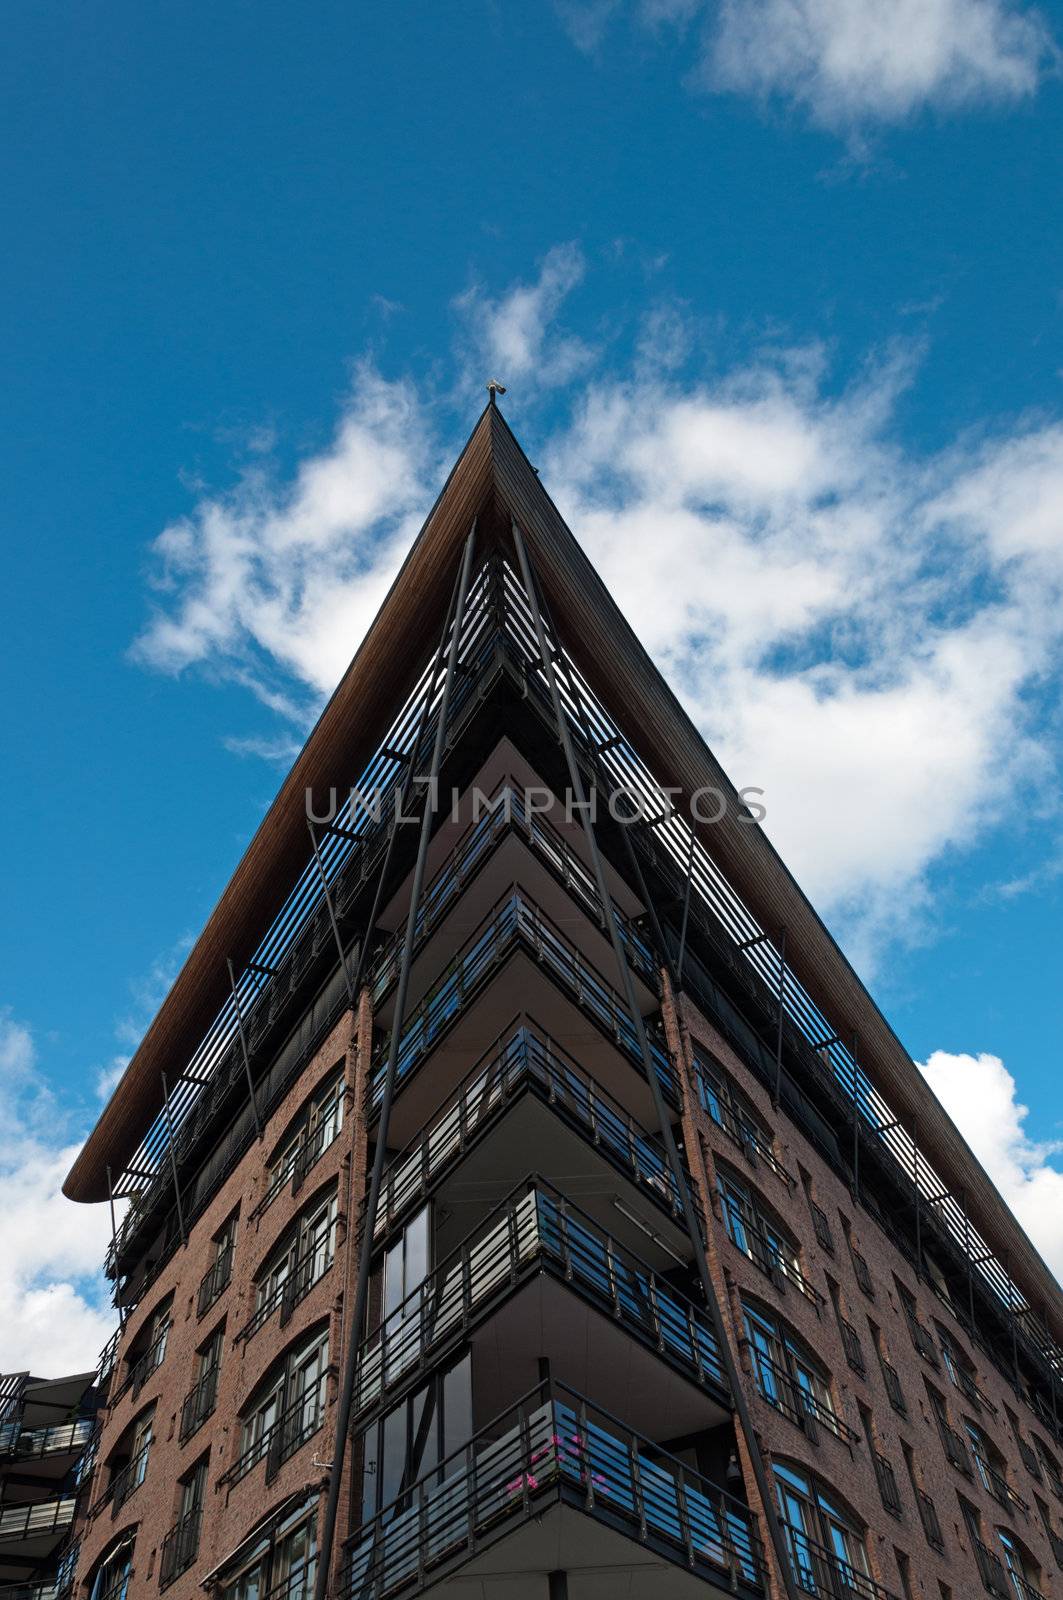 Big building with angled roof against the blue sky